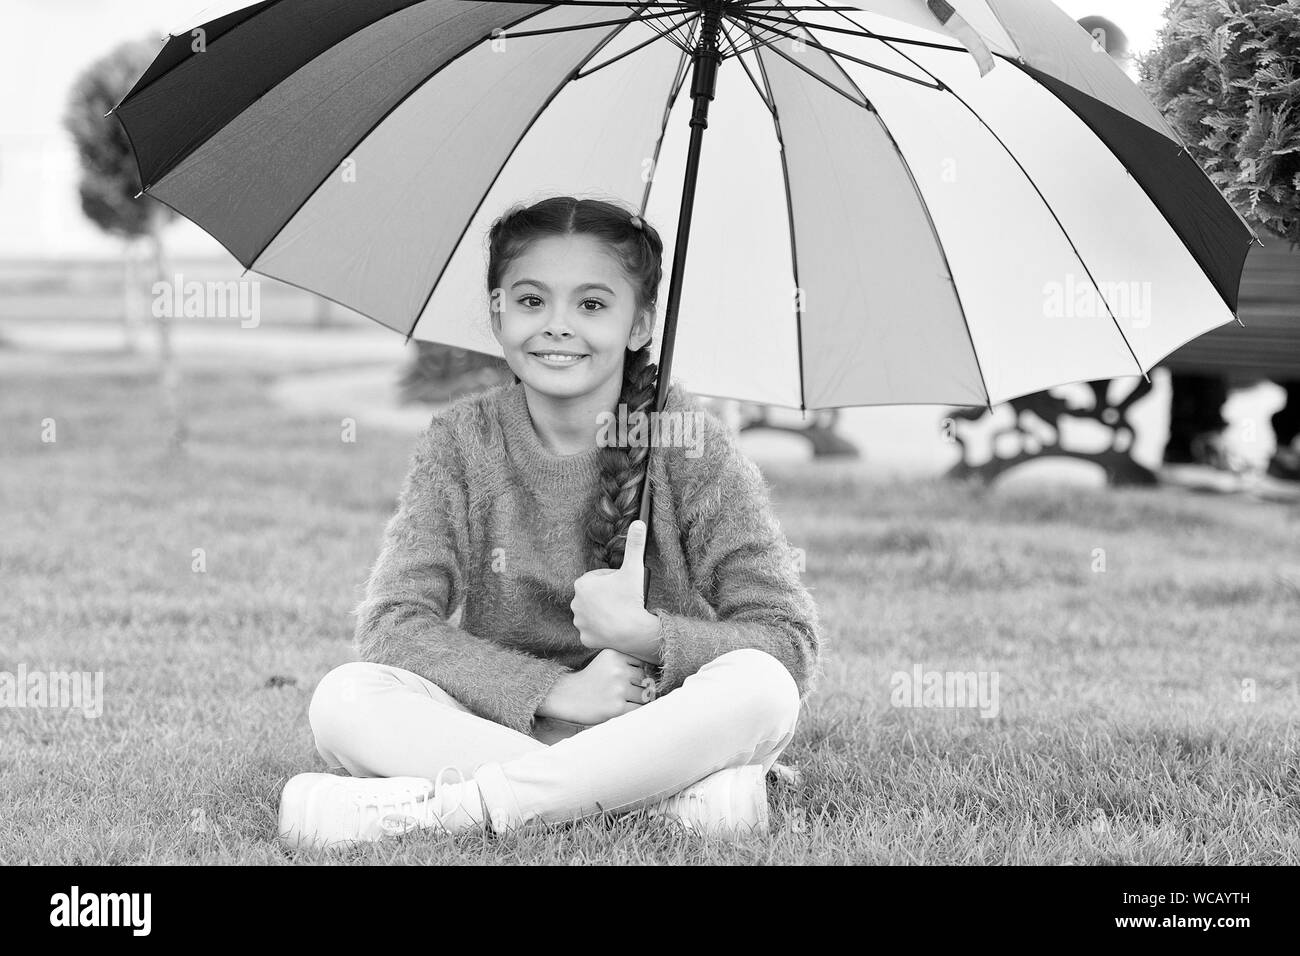 Everything better with my umbrella. Colorful accessory for cheerful mood. Girl child long hair with umbrella. Colorful accessory positive influence. Bright umbrella. Stay positive and optimistic. Stock Photo